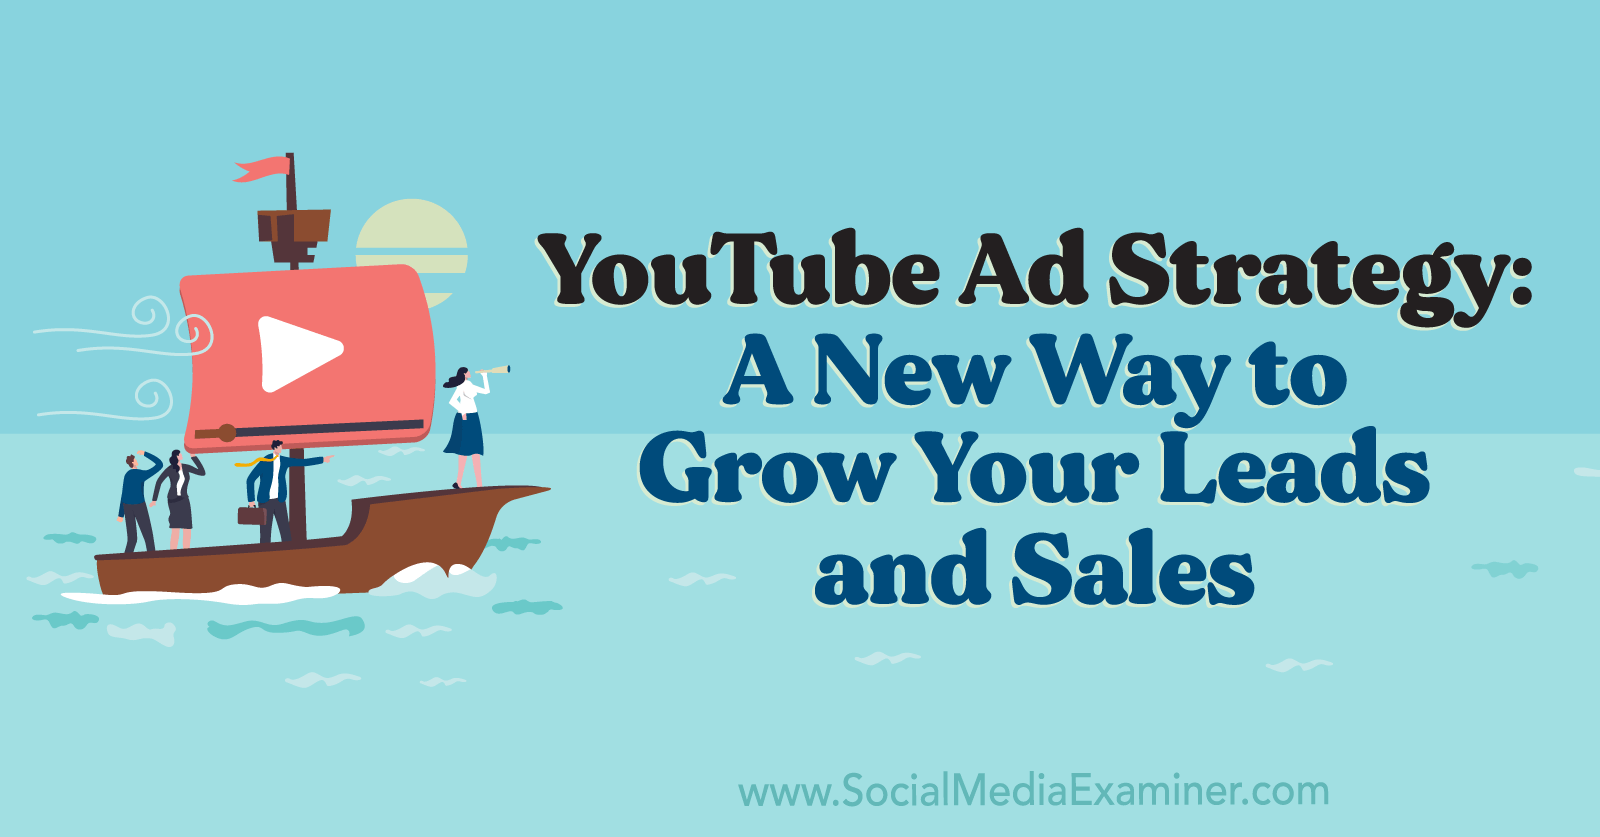 YouTube Ad Strategy: A New Way to Grow Your Leads and Sales by Social Media Examiner